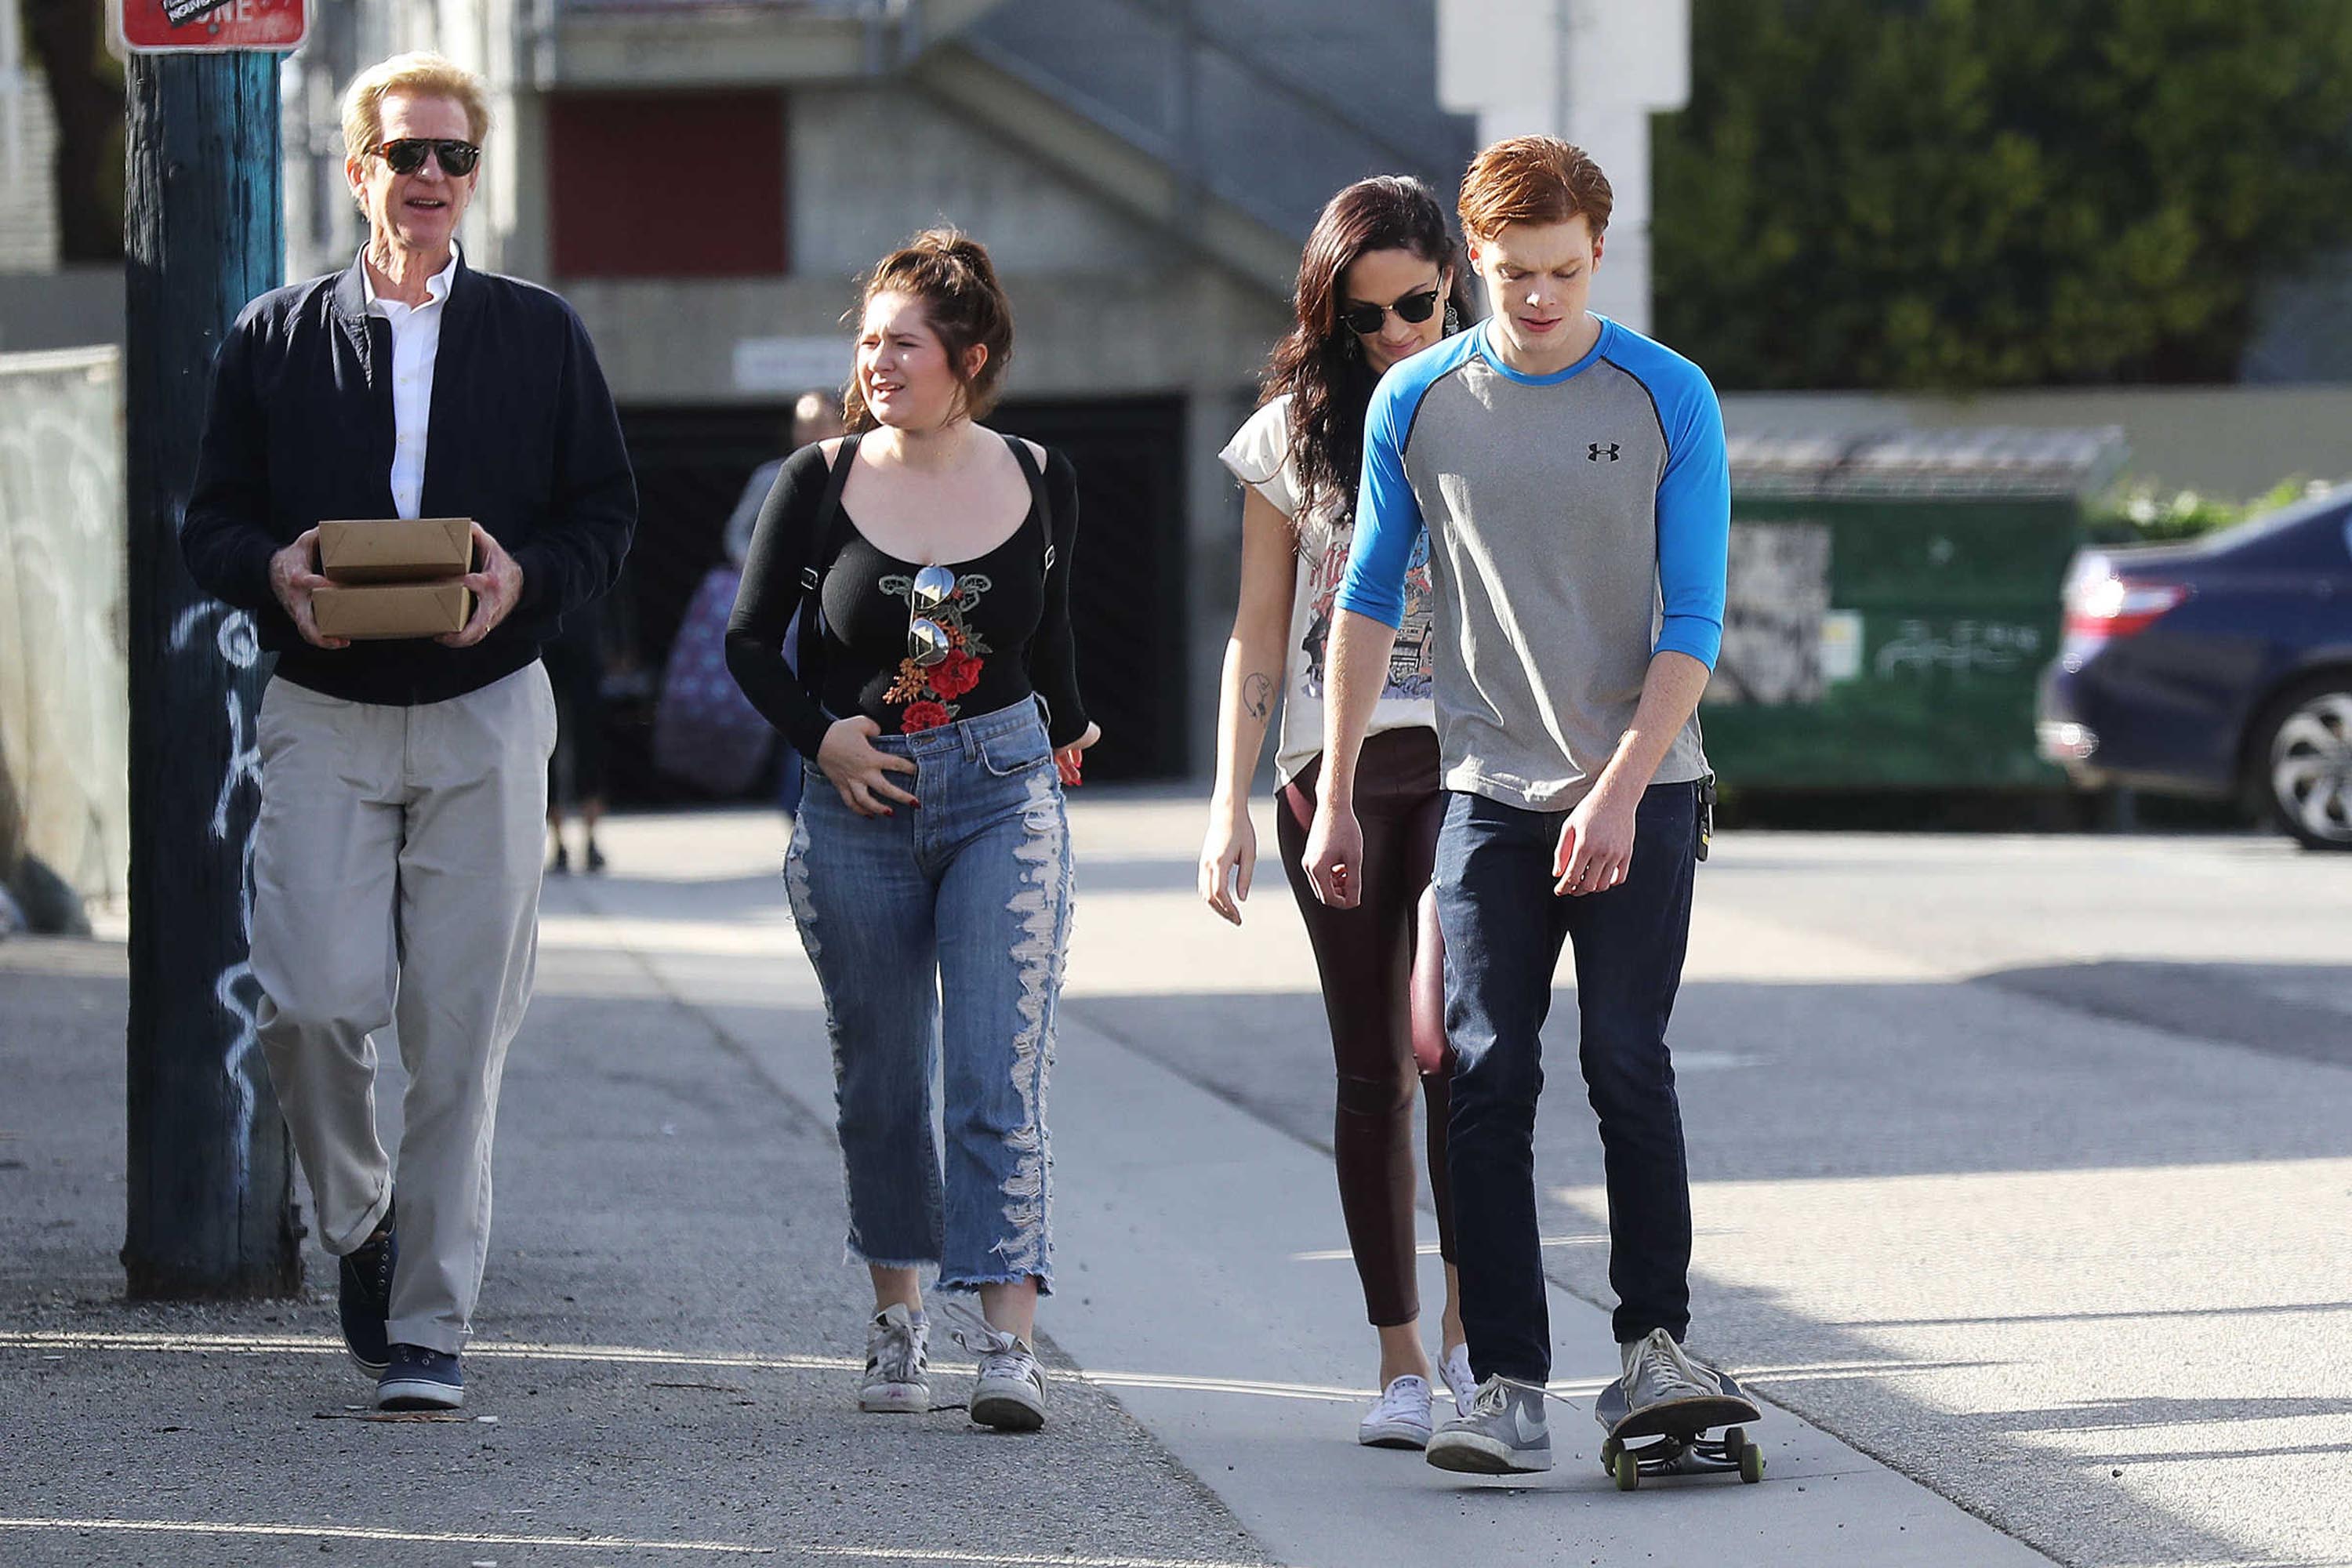 Emma Kenney out & about in Venice